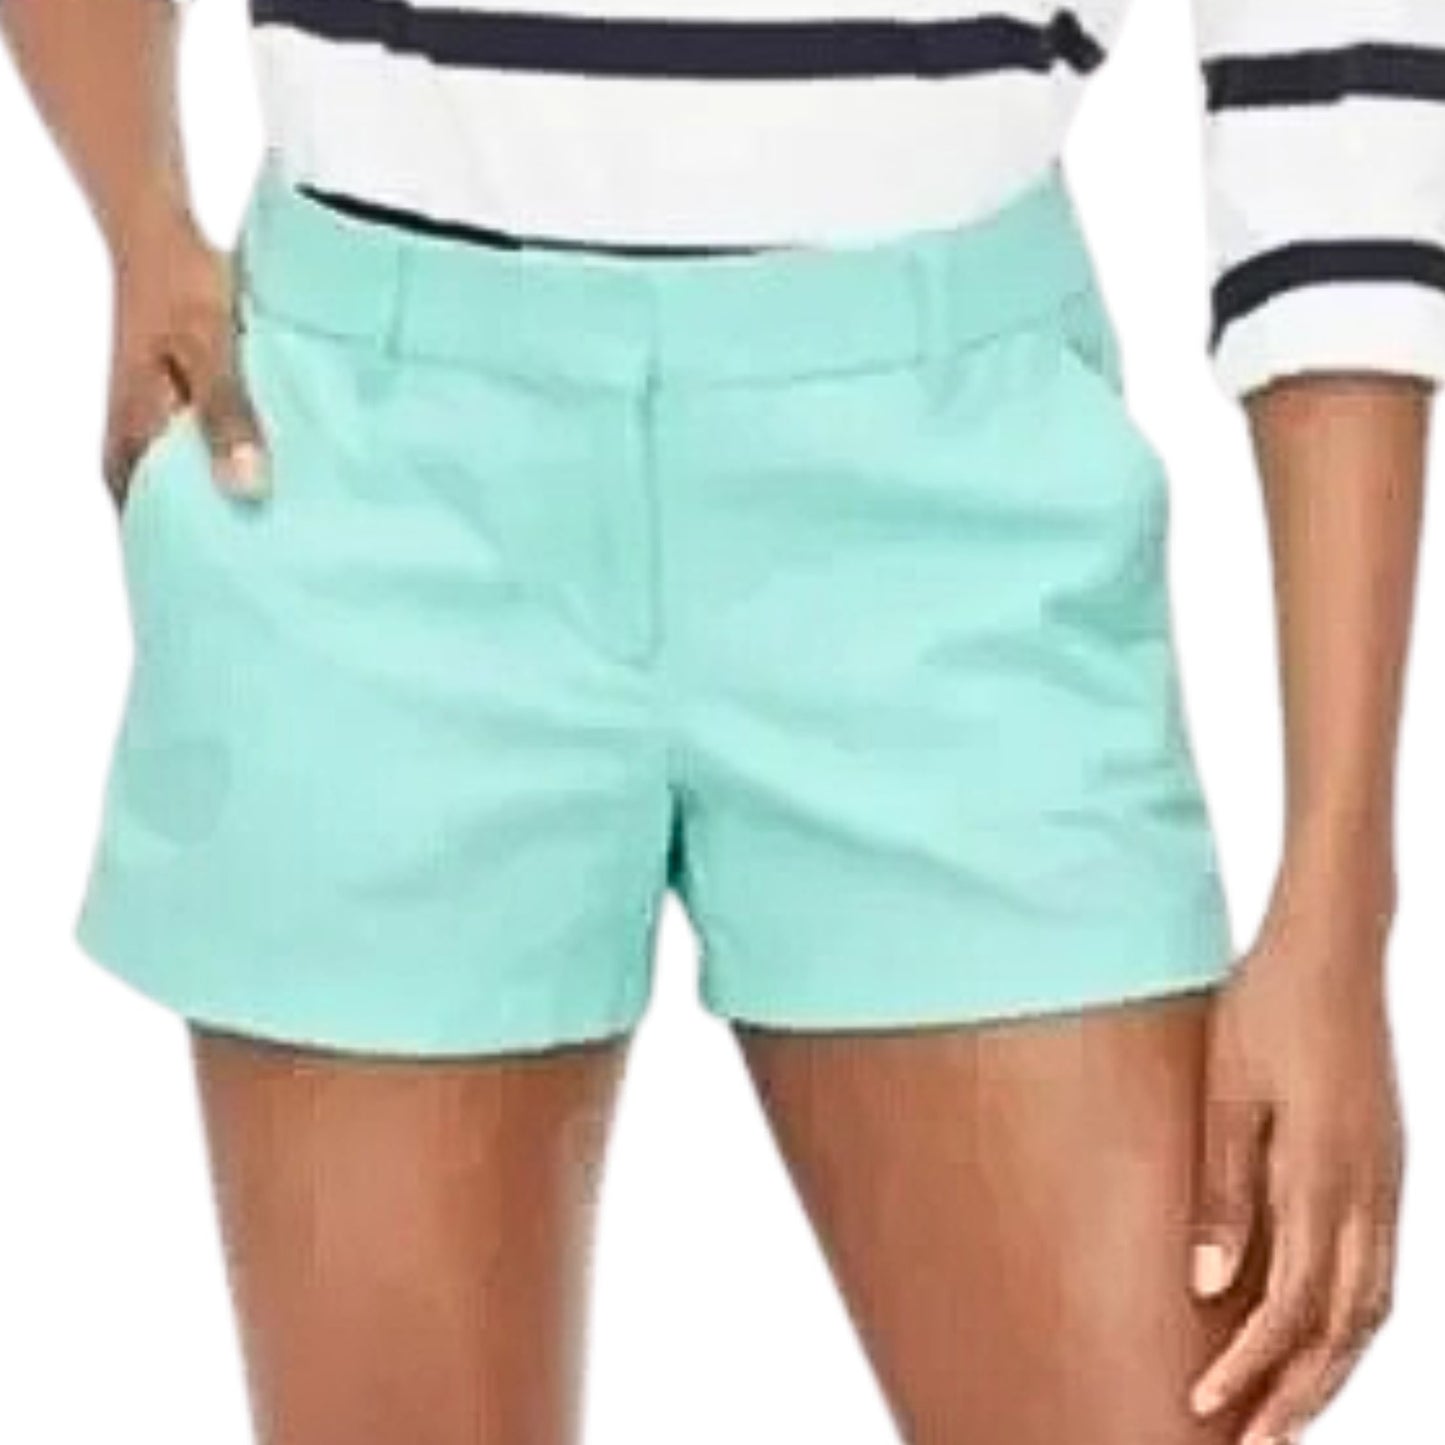 J. Crew Chino Shorts in Mint Green Size 2